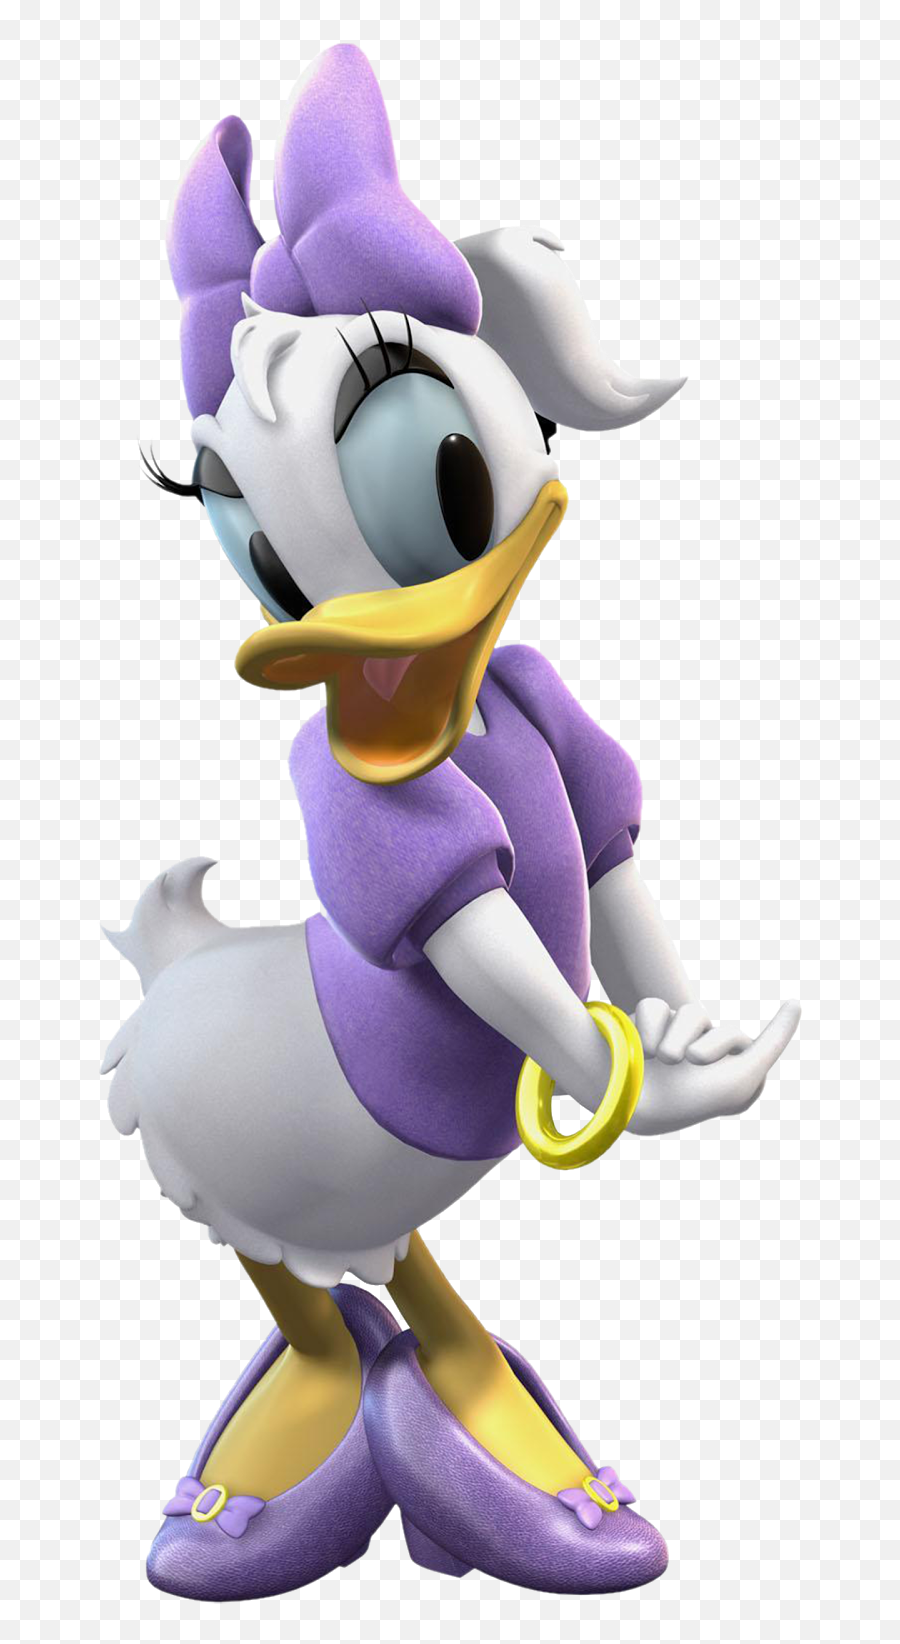 Free Png Mickey Mouse - Konfest Daisy Duck Mickey Mouse Clubhouse,Mickey Mouse Png Images